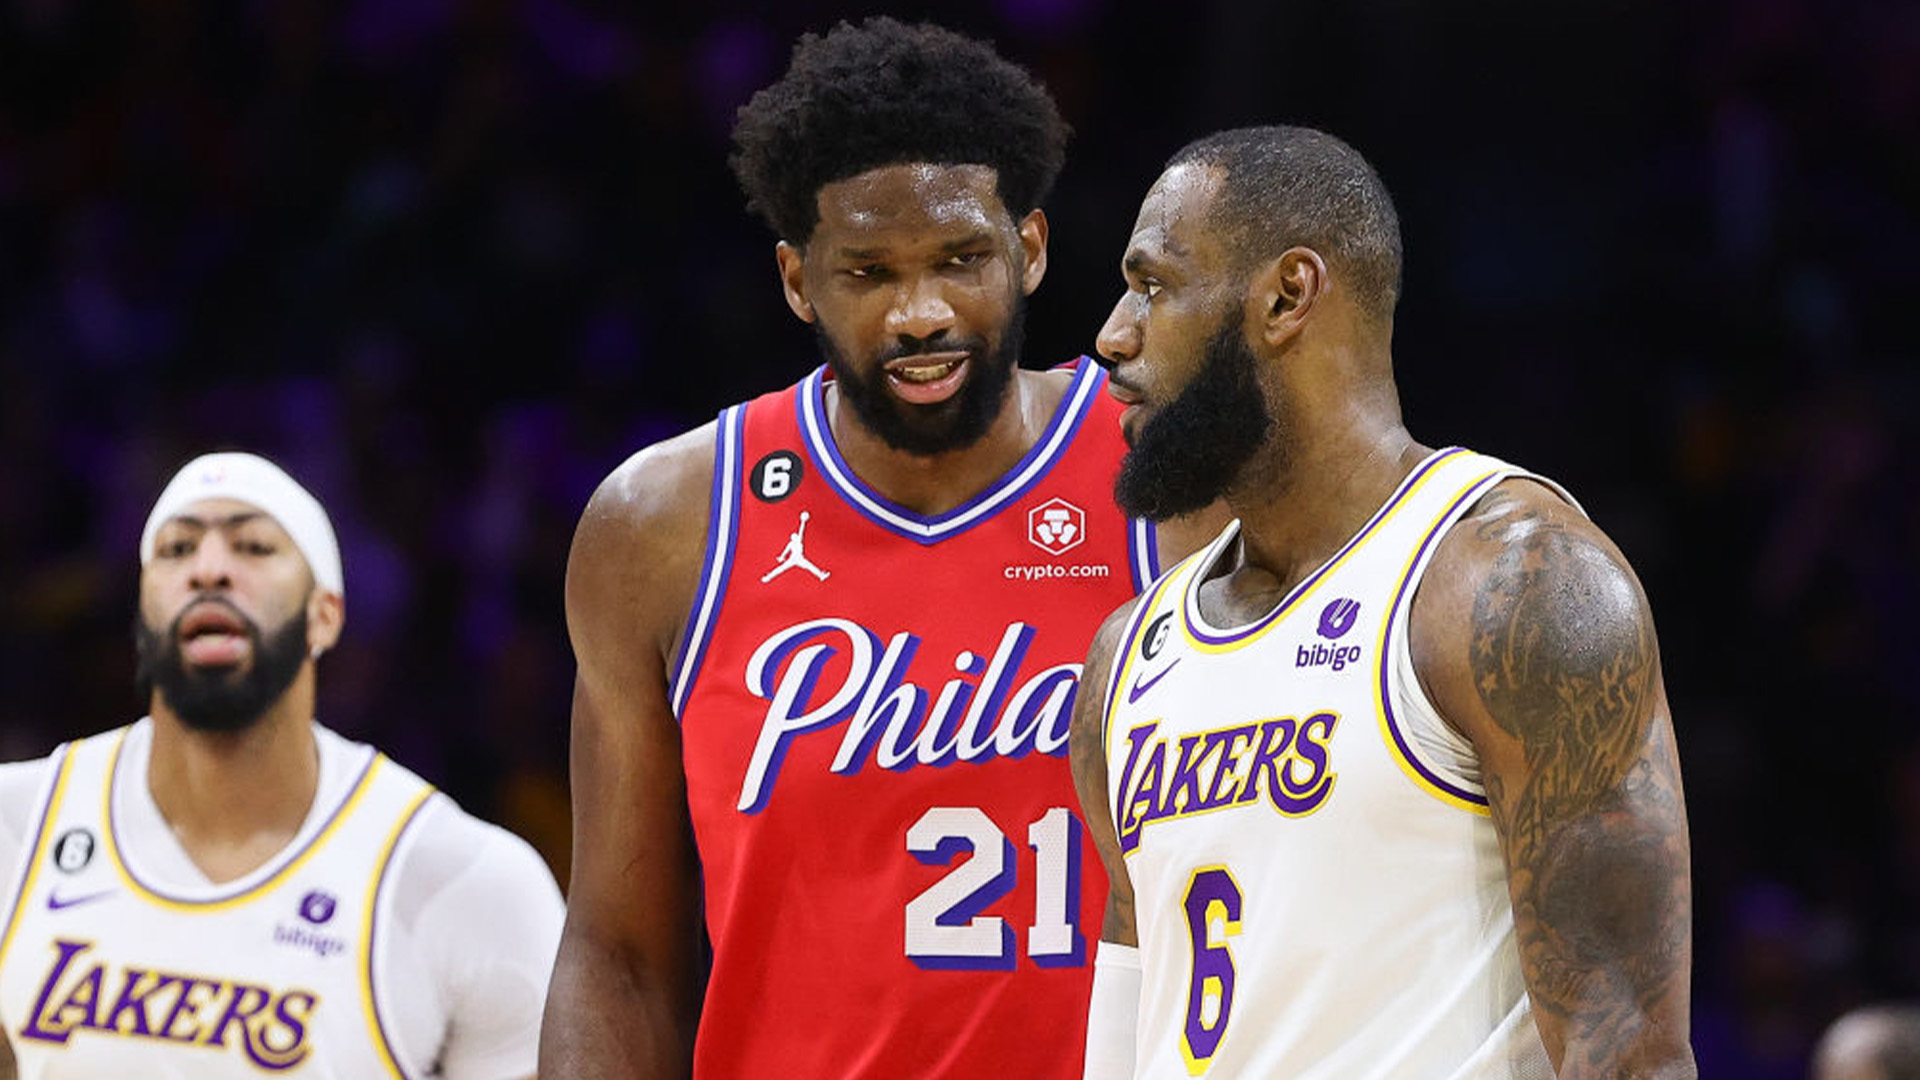 Joel Embiid Launches Media Company With LeBron James And Maverick Carter's SpringHill Company